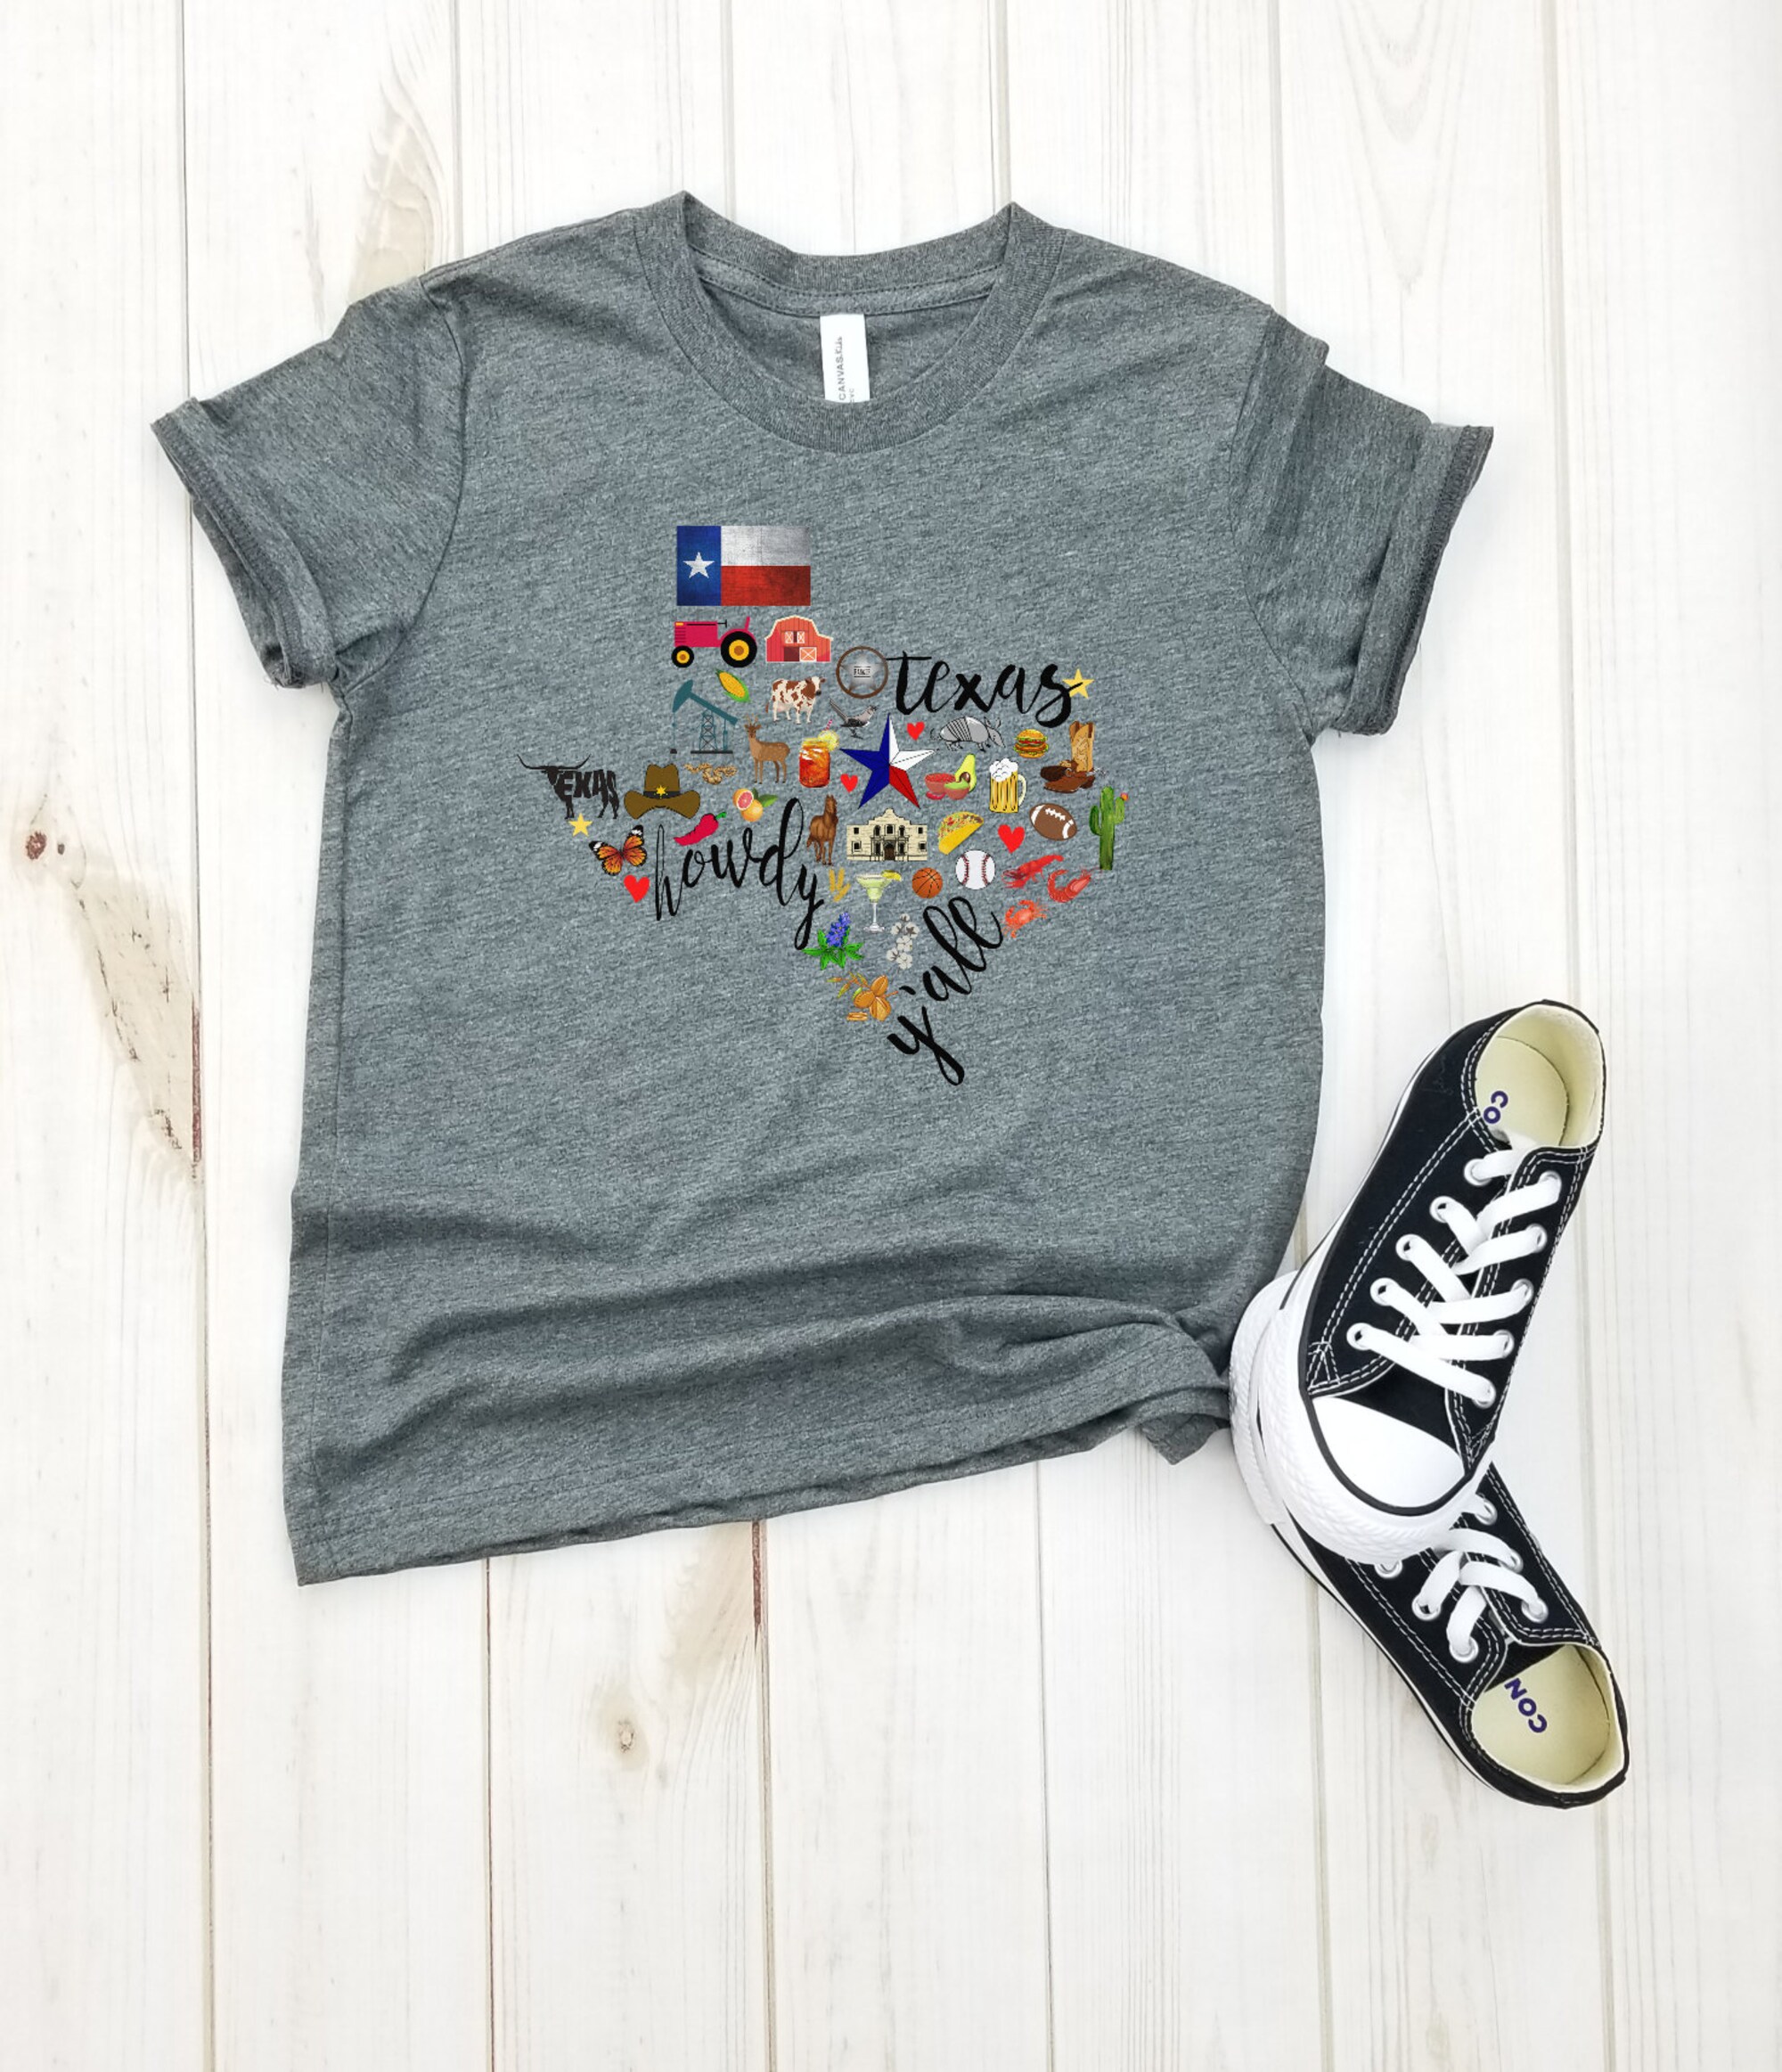 Discover Texas Icons - Toddler Shirt, Texas State, Texas Girl Shirt, TX Shirt, Texas Favorites, Texas Pride Shirt, Texas Love, The Lone Star State.